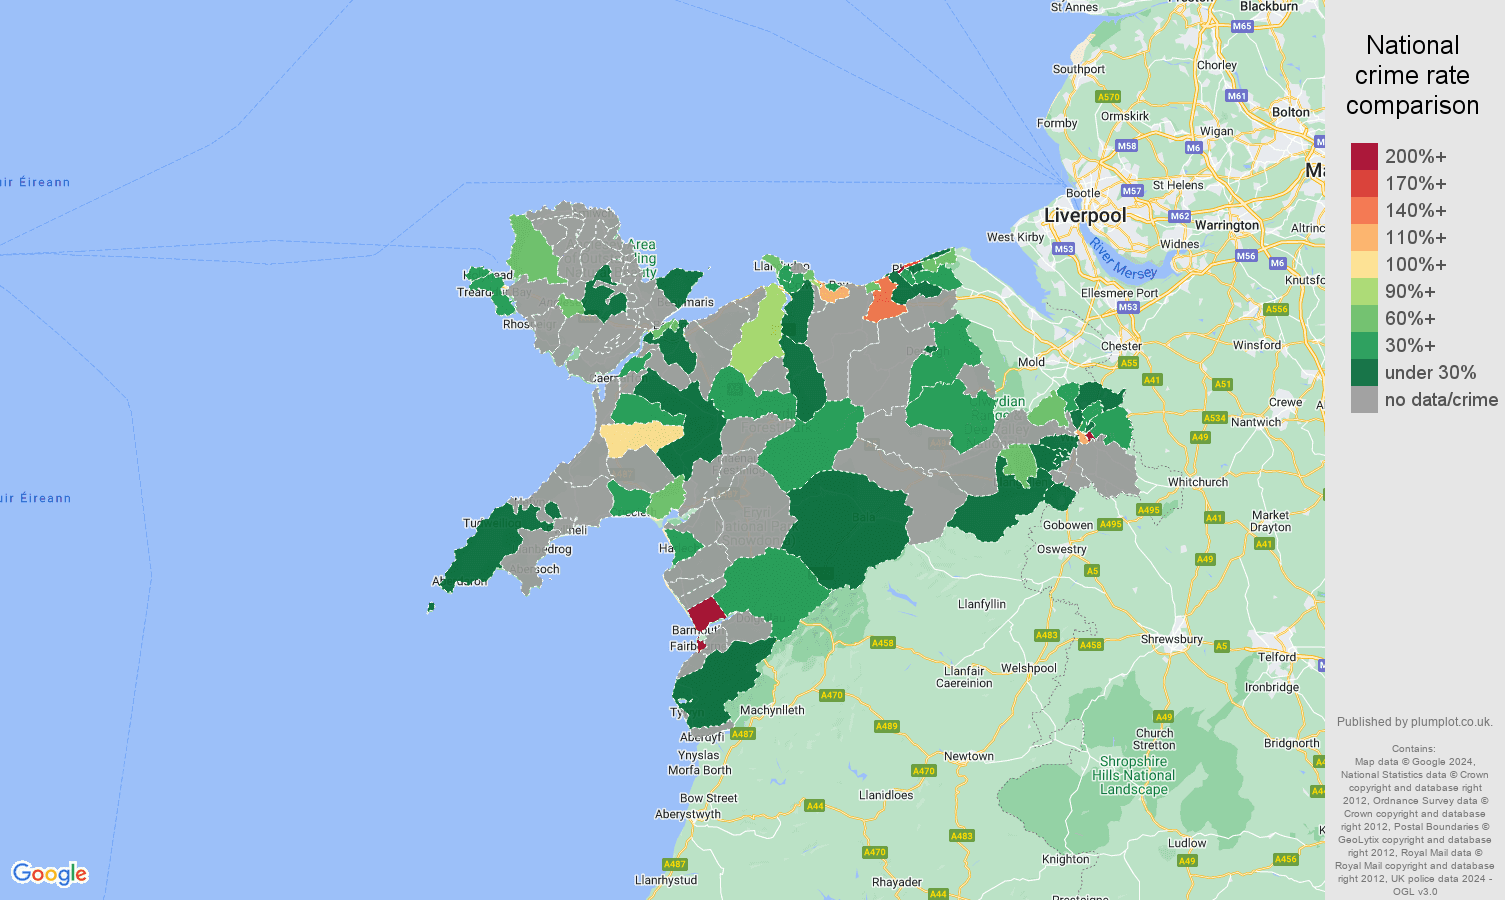 Llandudno bicycle theft crime rate comparison map